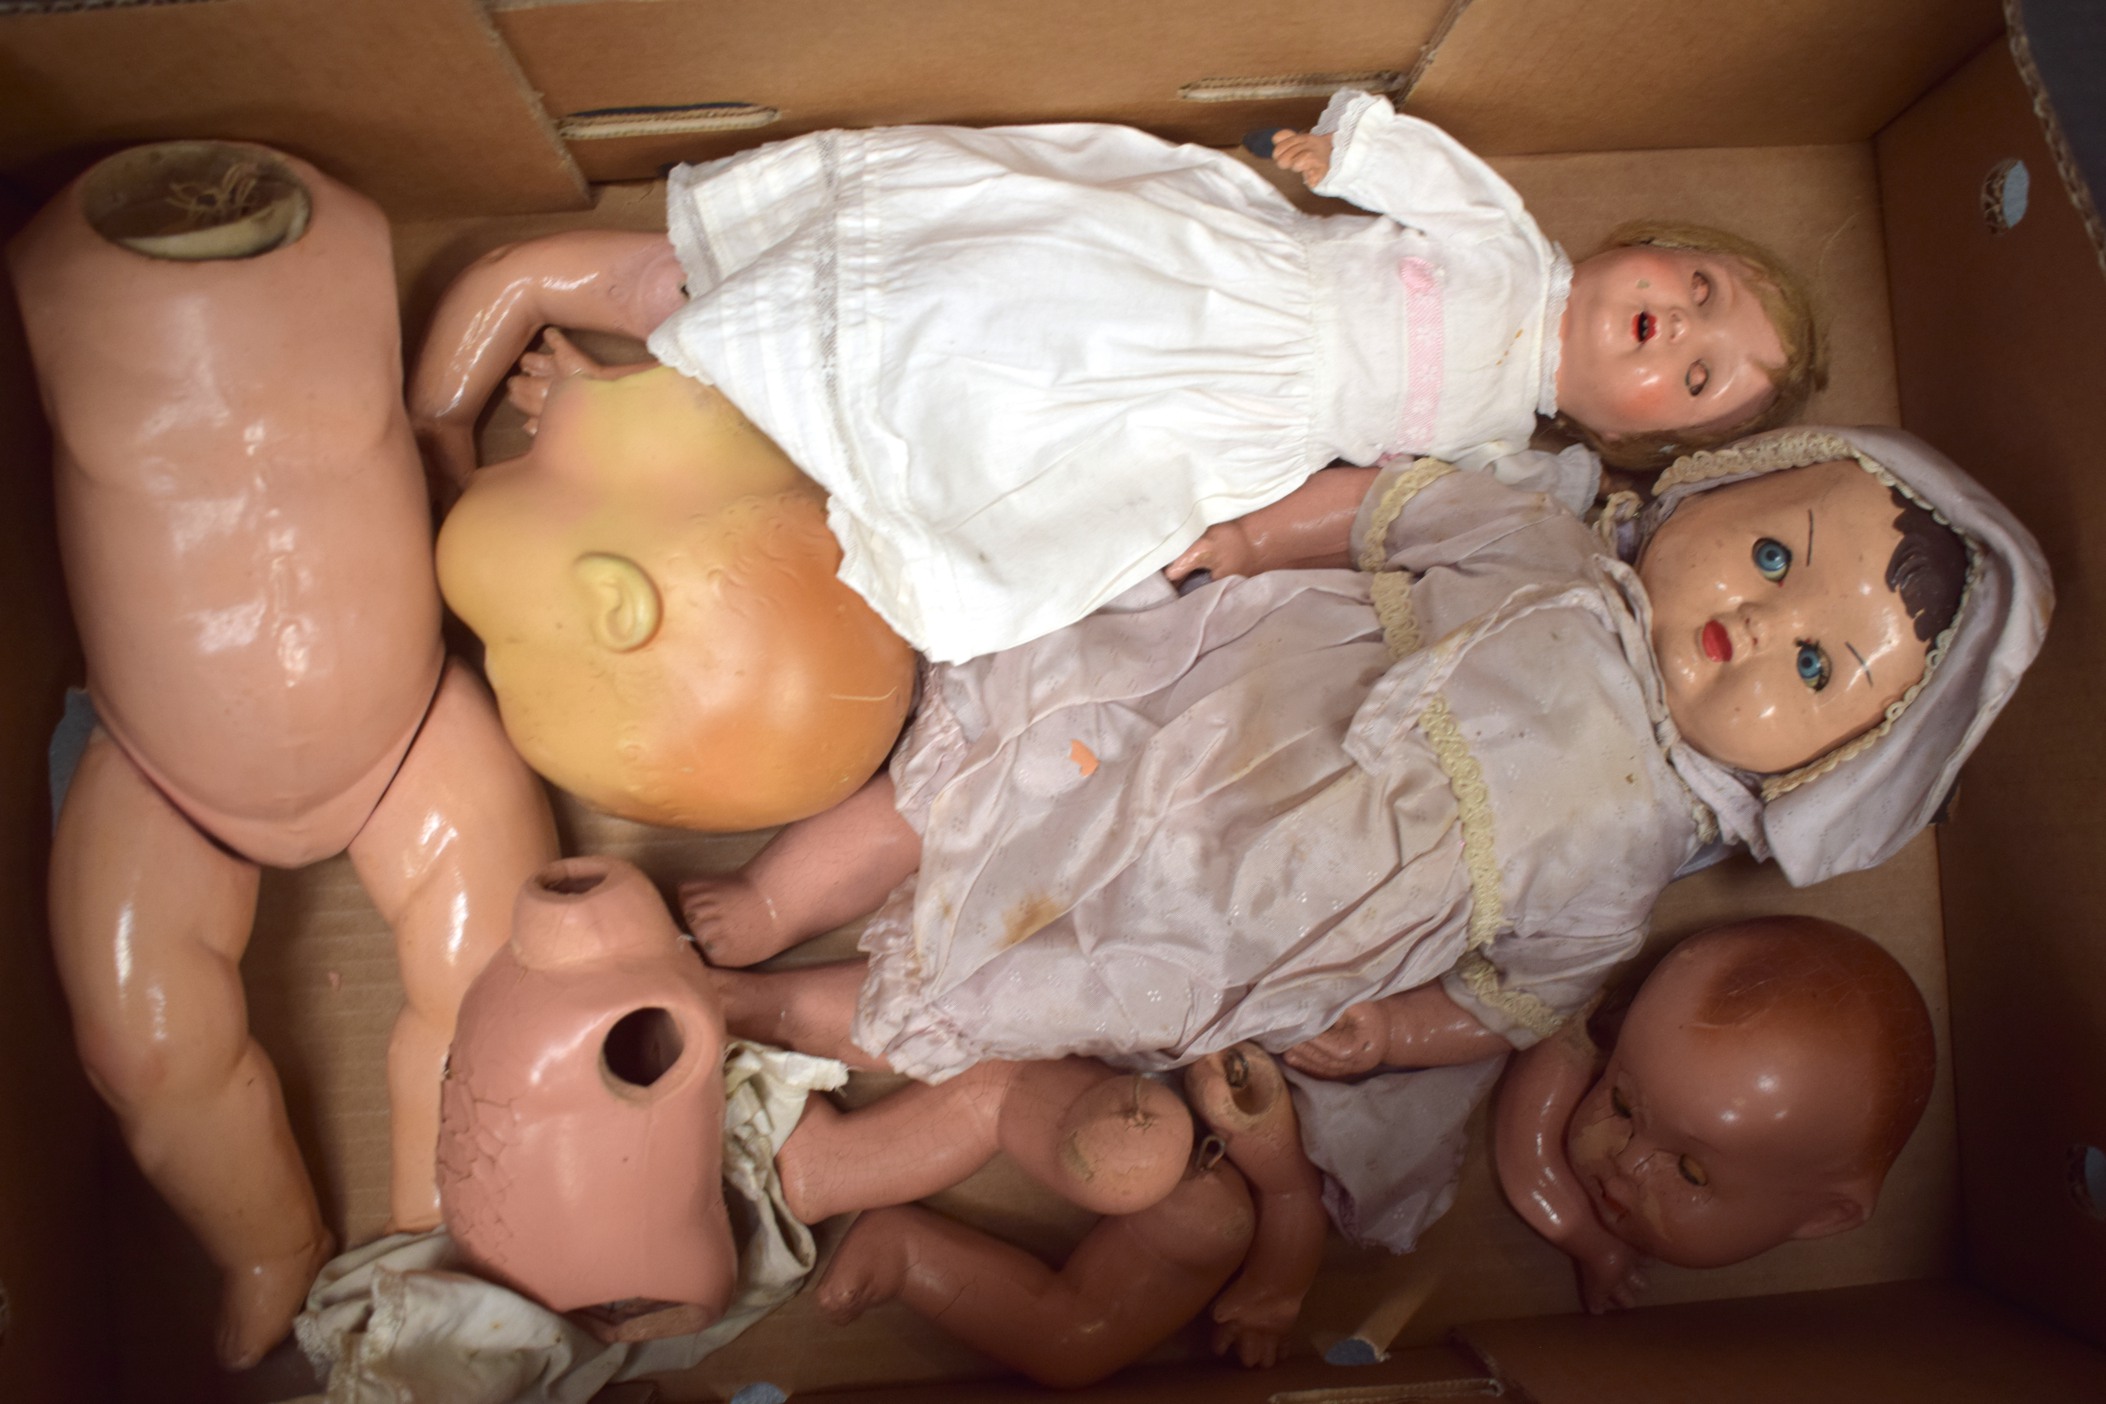 A QUANTITY OF DOLLS, together with associated limbs.